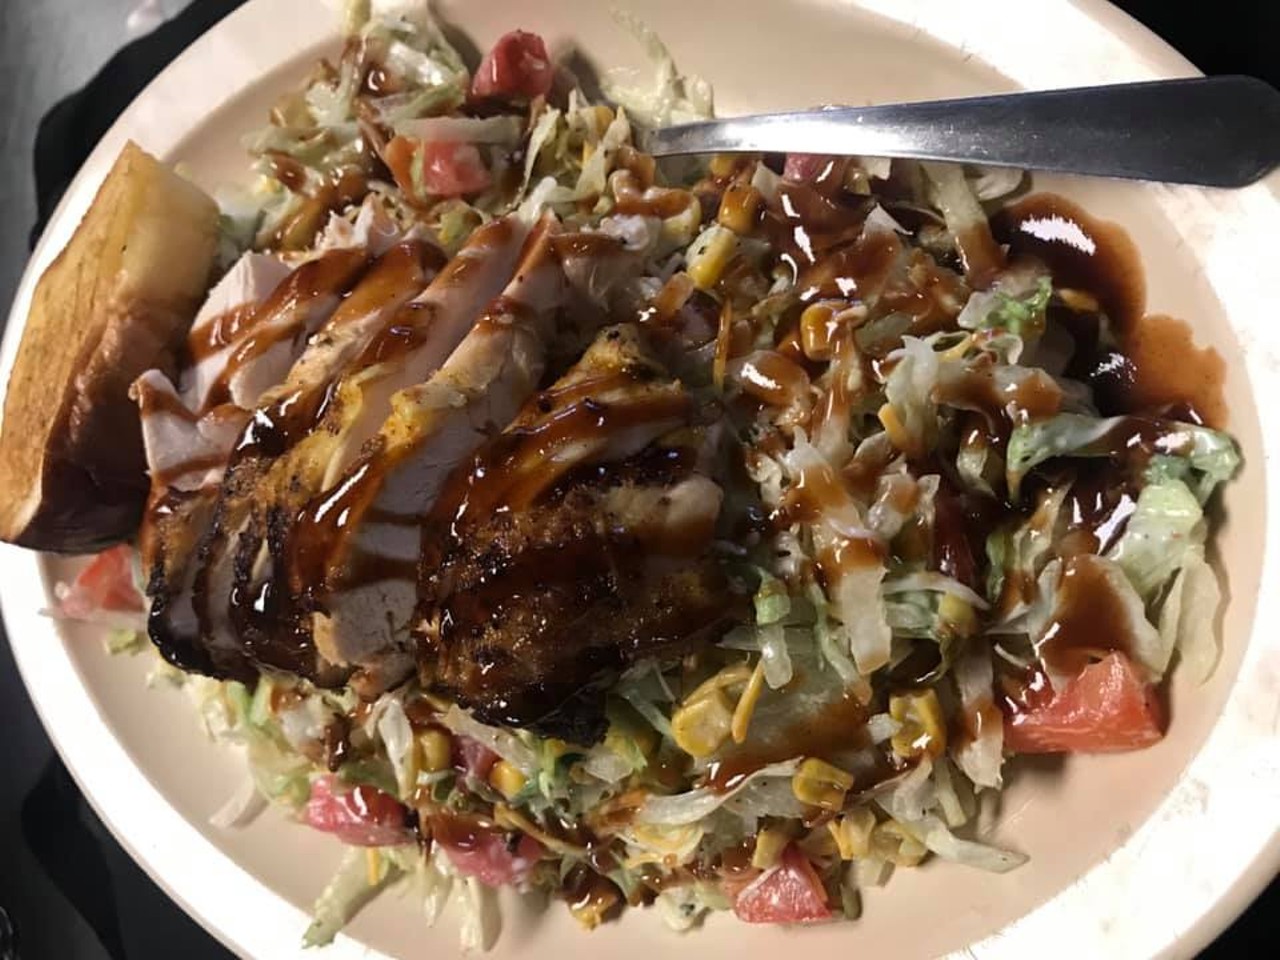 Porkie's Original BBQ
256 E. Main St., Apopka, 407-880-3351 
"You can smell our butts a mile away" is this restaurant&#146;s slogan and they back it up with delicious pork plates.
Photo via Porkie&#146;s Original BBQ/Facebook